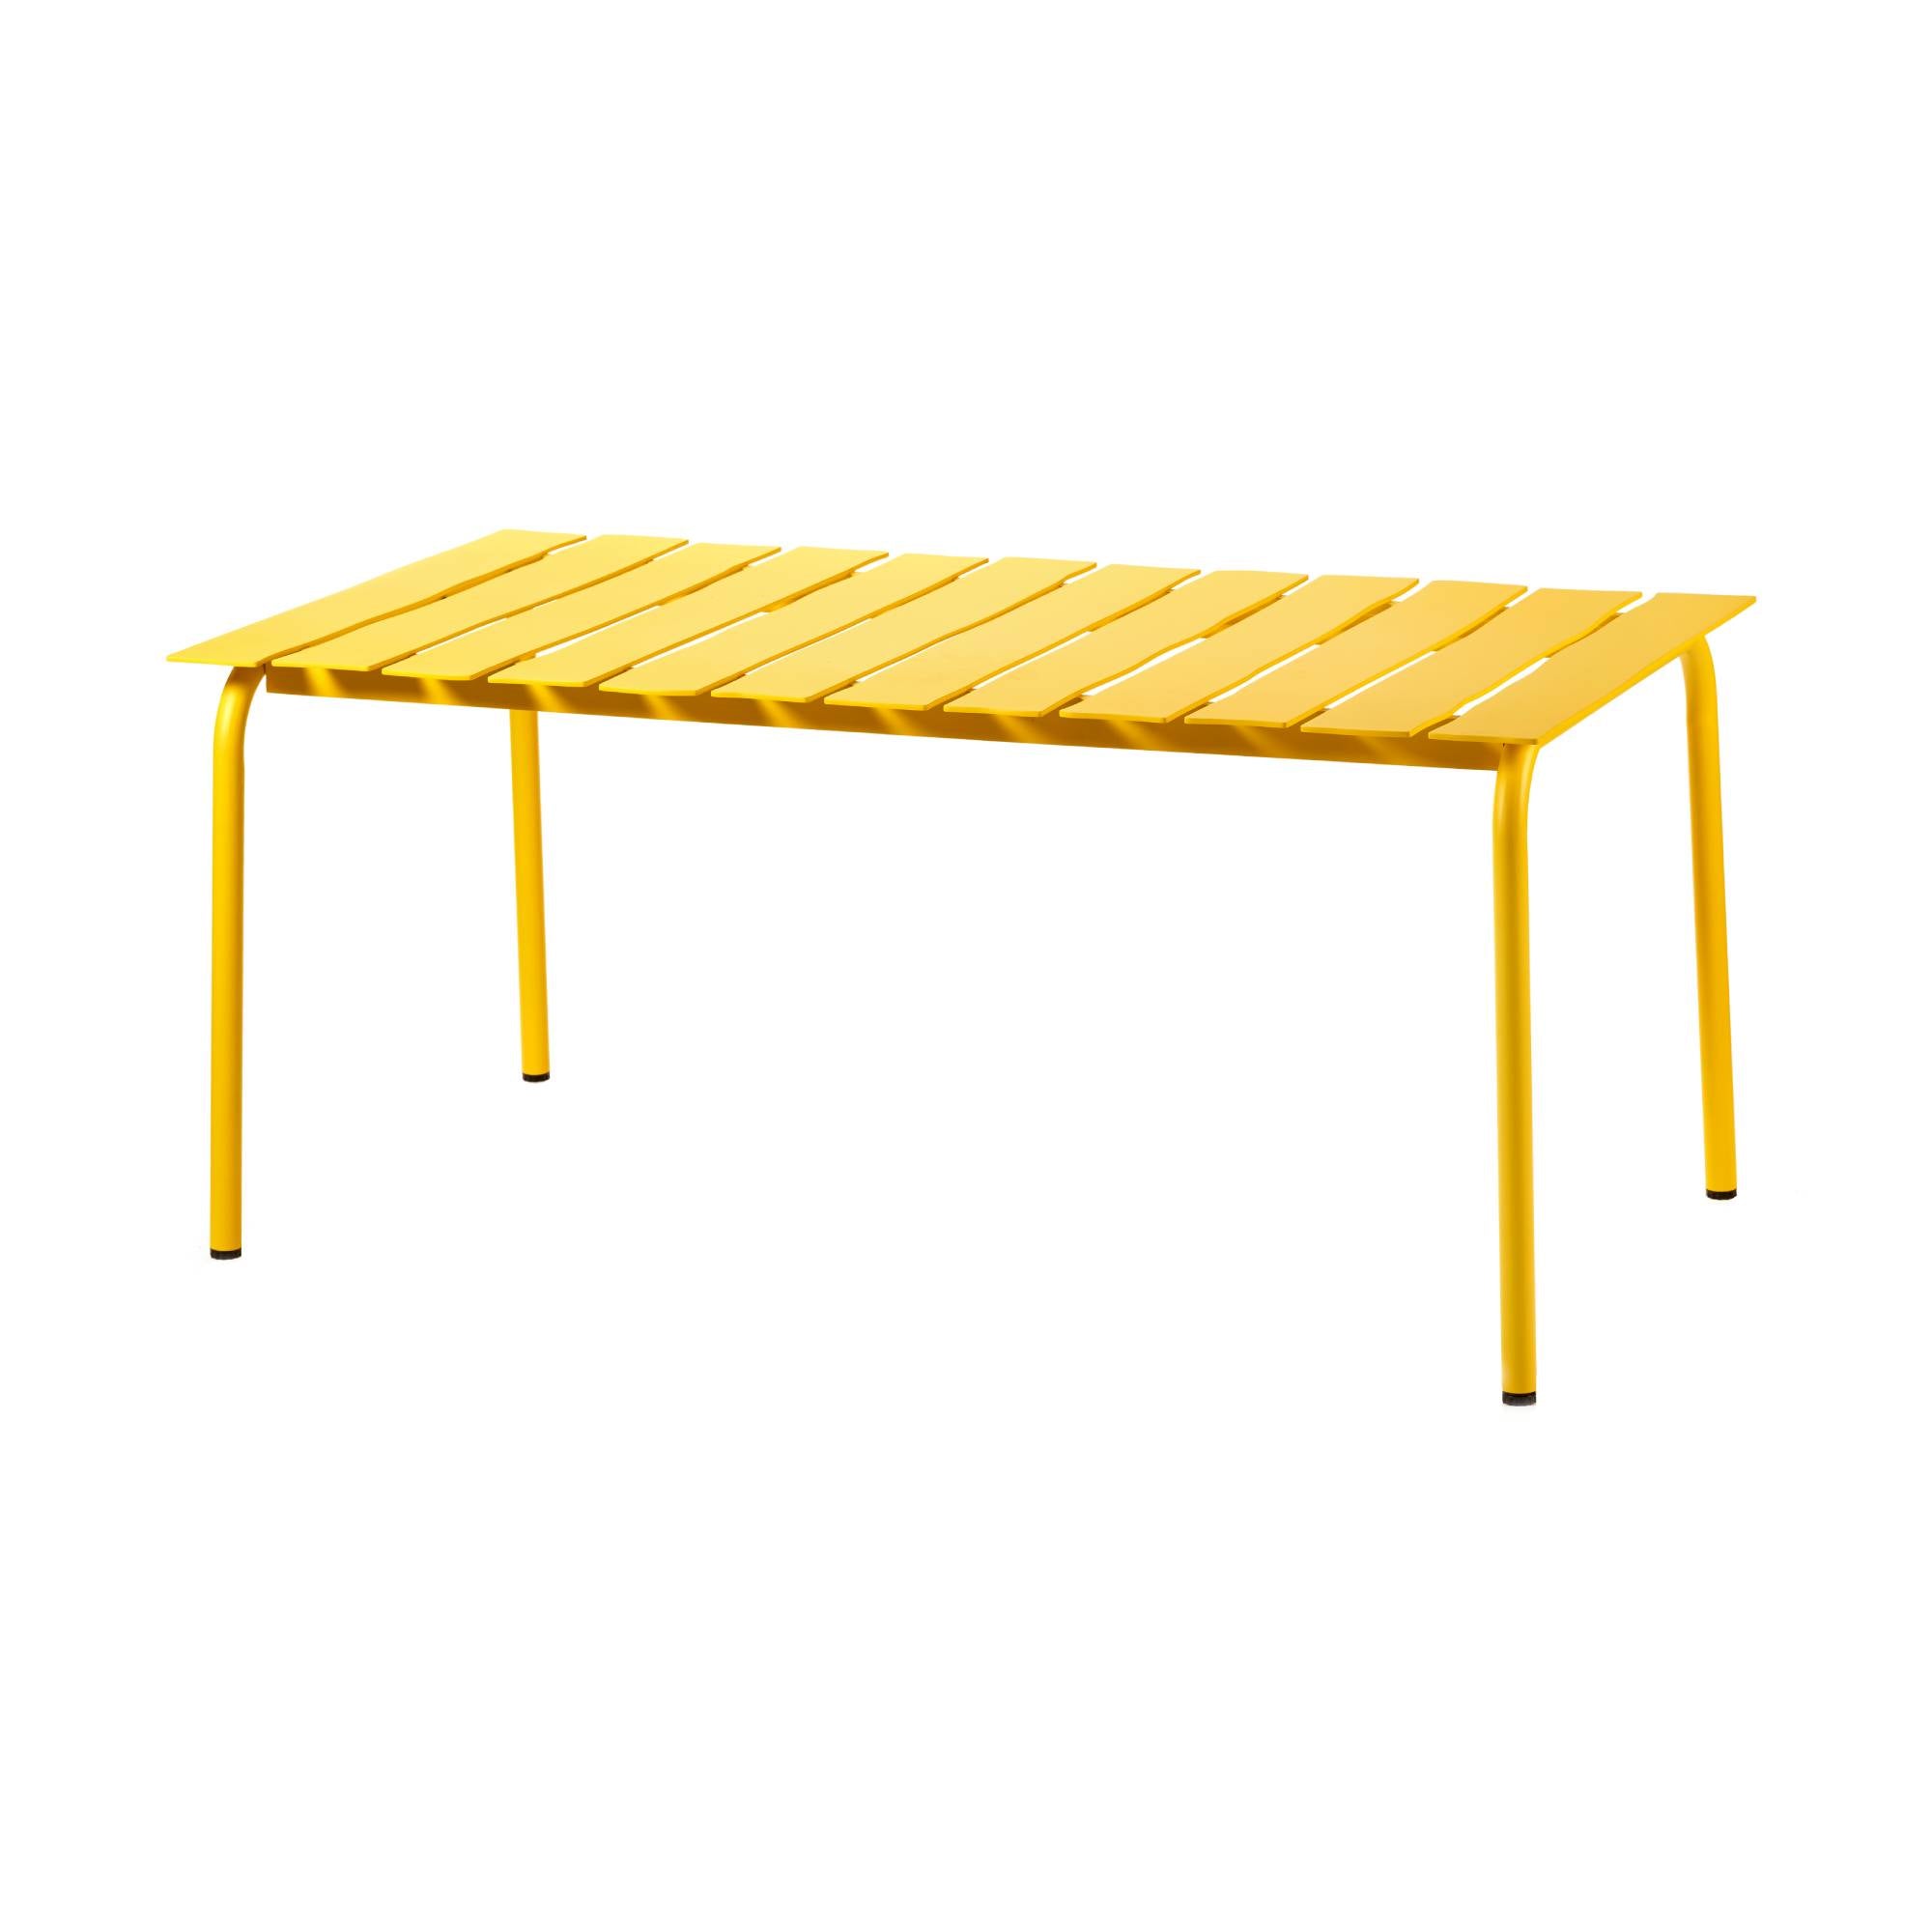 Aligned Outdoor Dining Table: Rectangle + Yellow